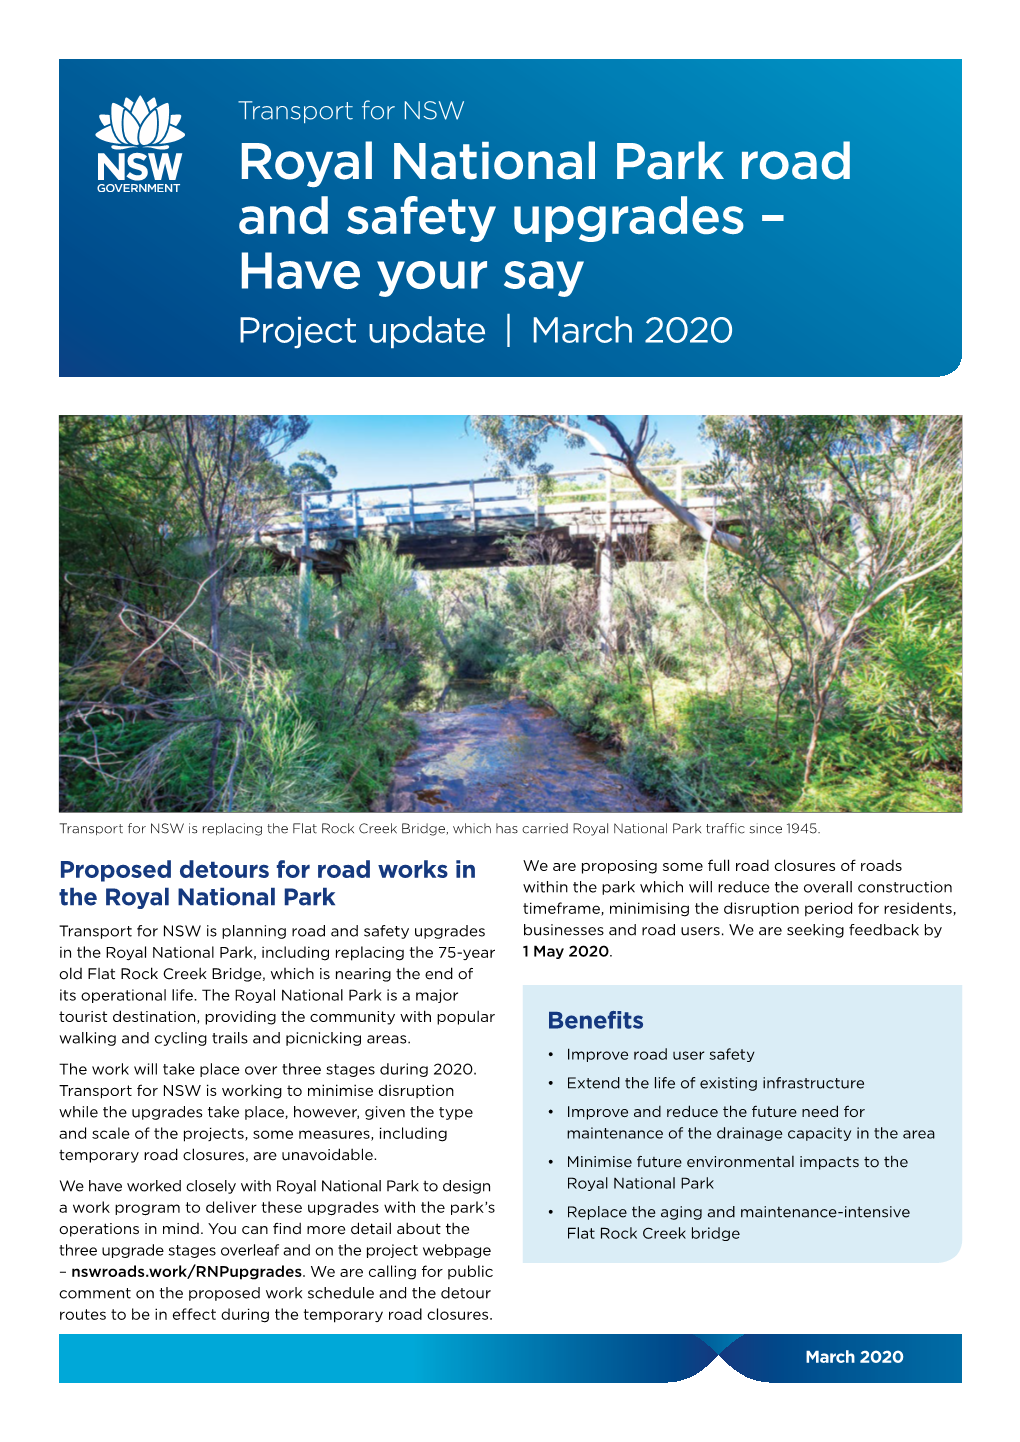 Royal National Park Road and Safety Upgrades – Have Your Say Project Update | March 2020